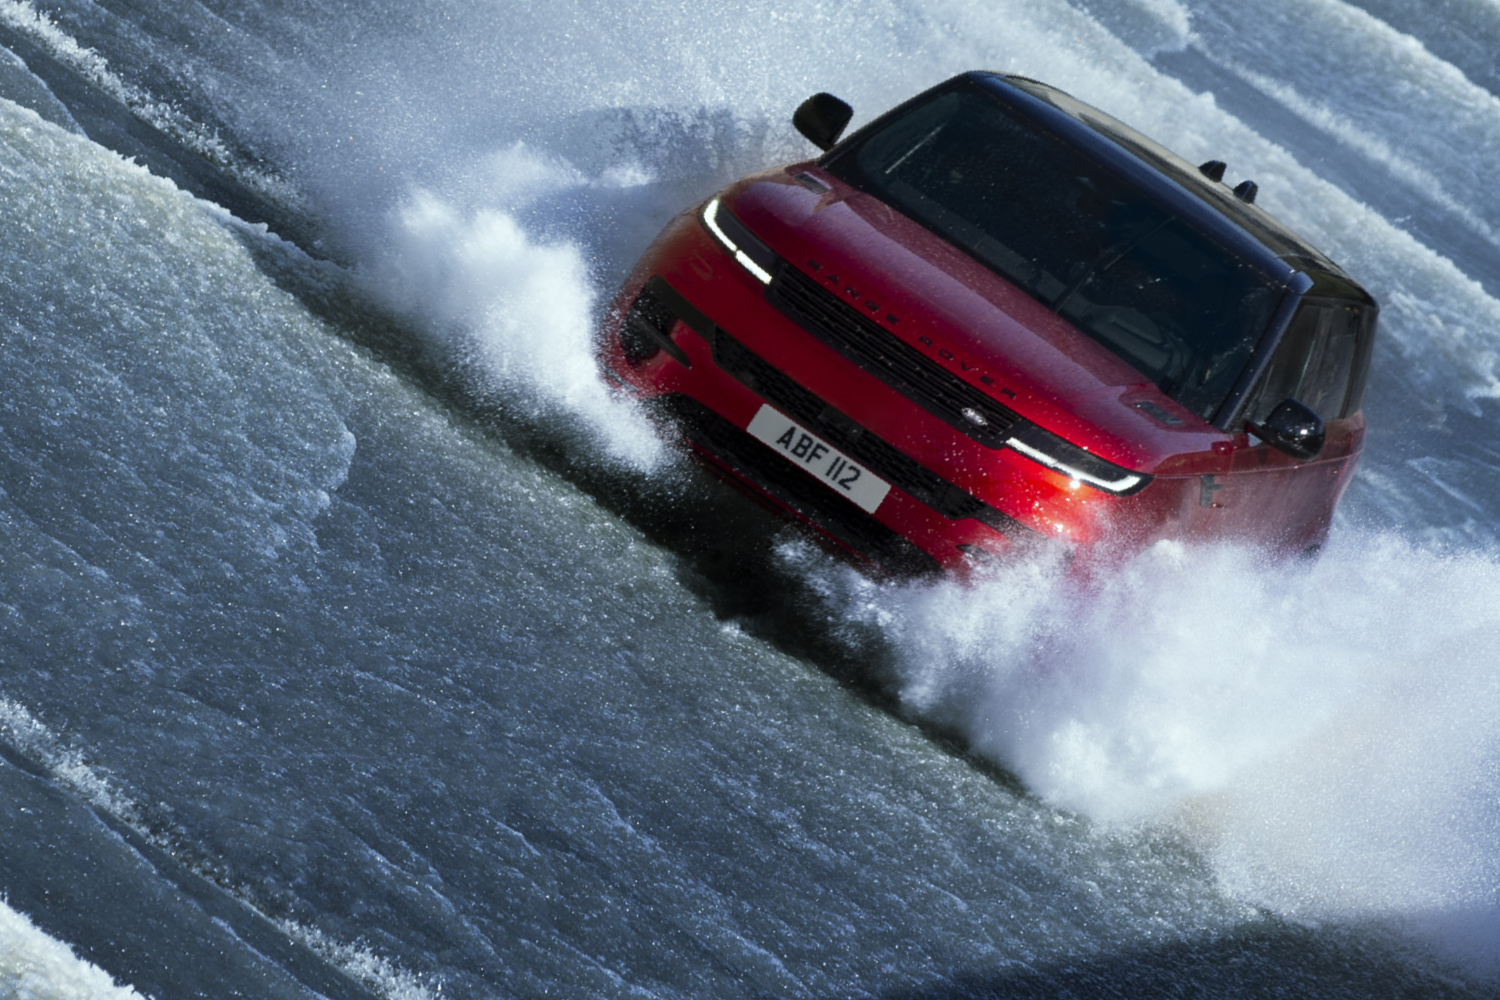 New Range Rover Sport makes big dam debut. Image by Land Rover.